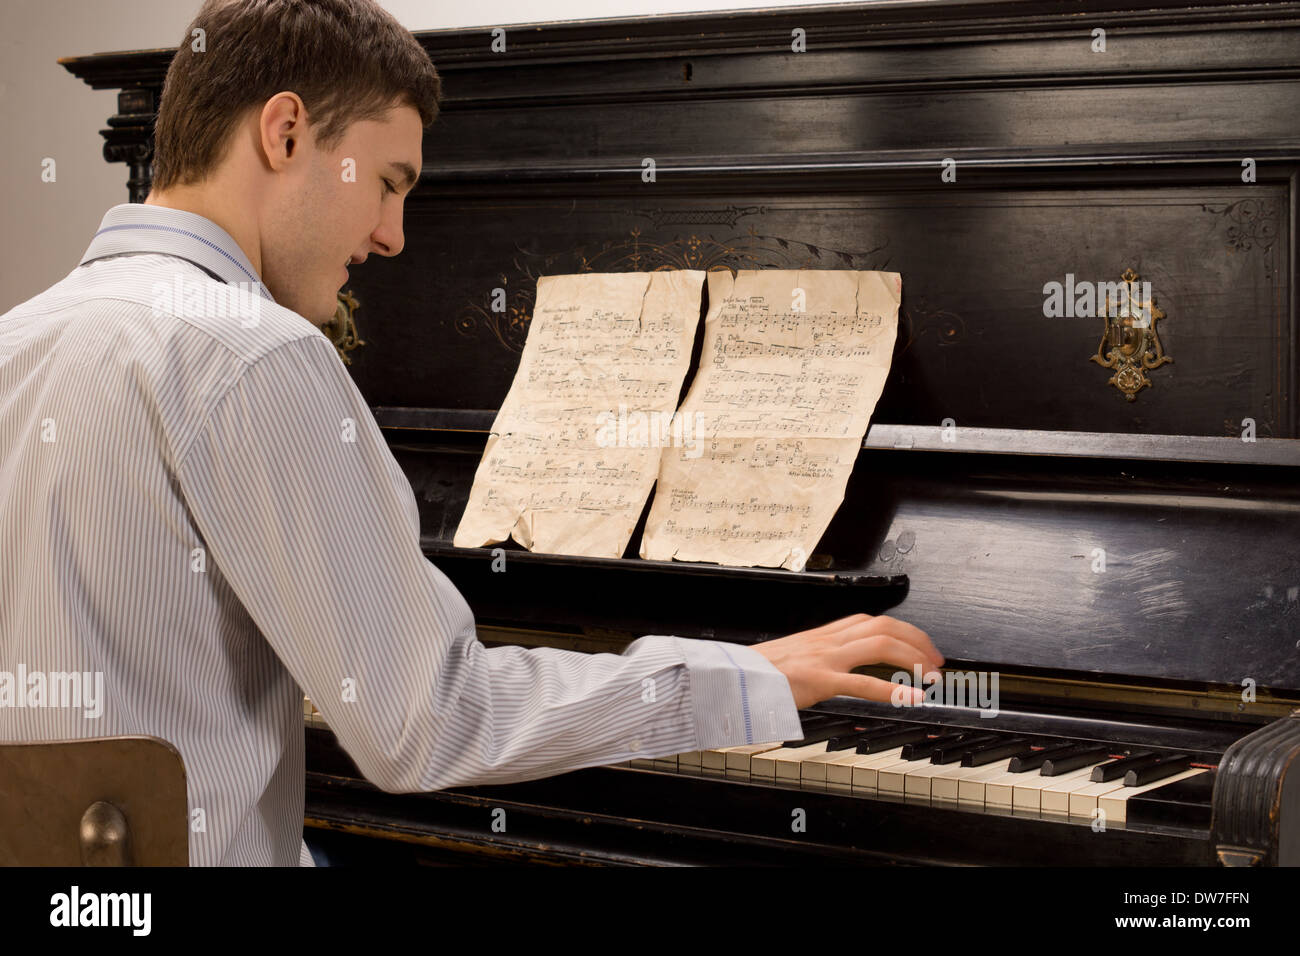 Young man having fun playing the piano smiling as he plays a melody from an  old music score on a wooden upright piano Stock Photo - Alamy